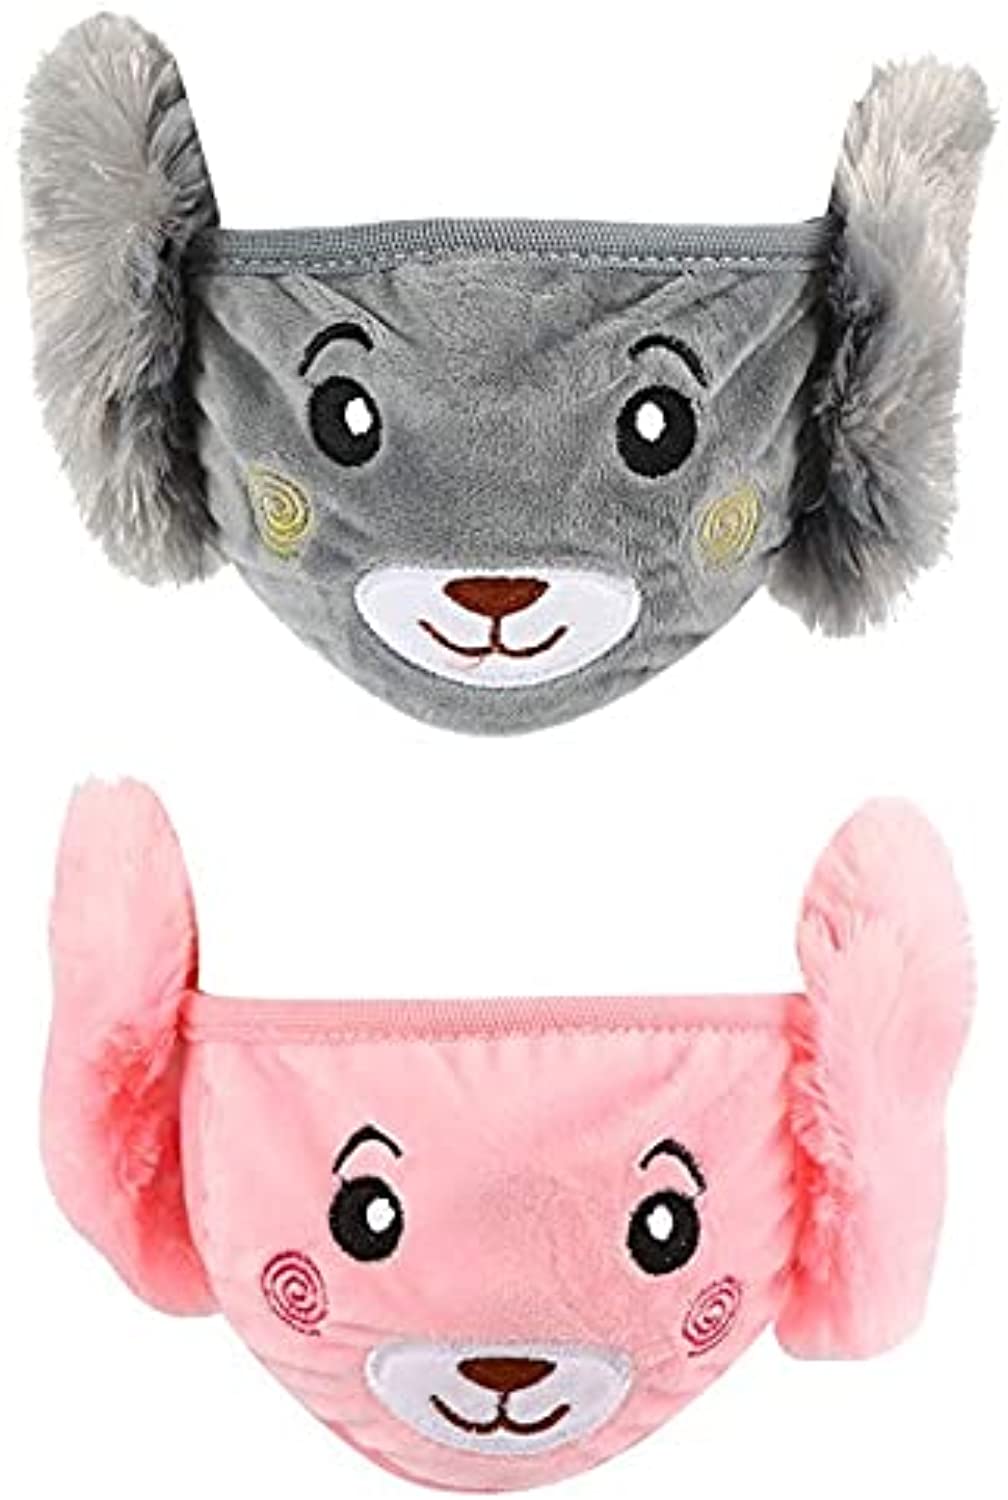 LAMANSH Winter Masks Multicolor / Fabric / Pack of 5 LAMANSH® 5 pc Girls/Boys Warm Winter Face Mask with Plush Ear Muffs Ear Covers Pack of 5 (Size 3-16 Years)